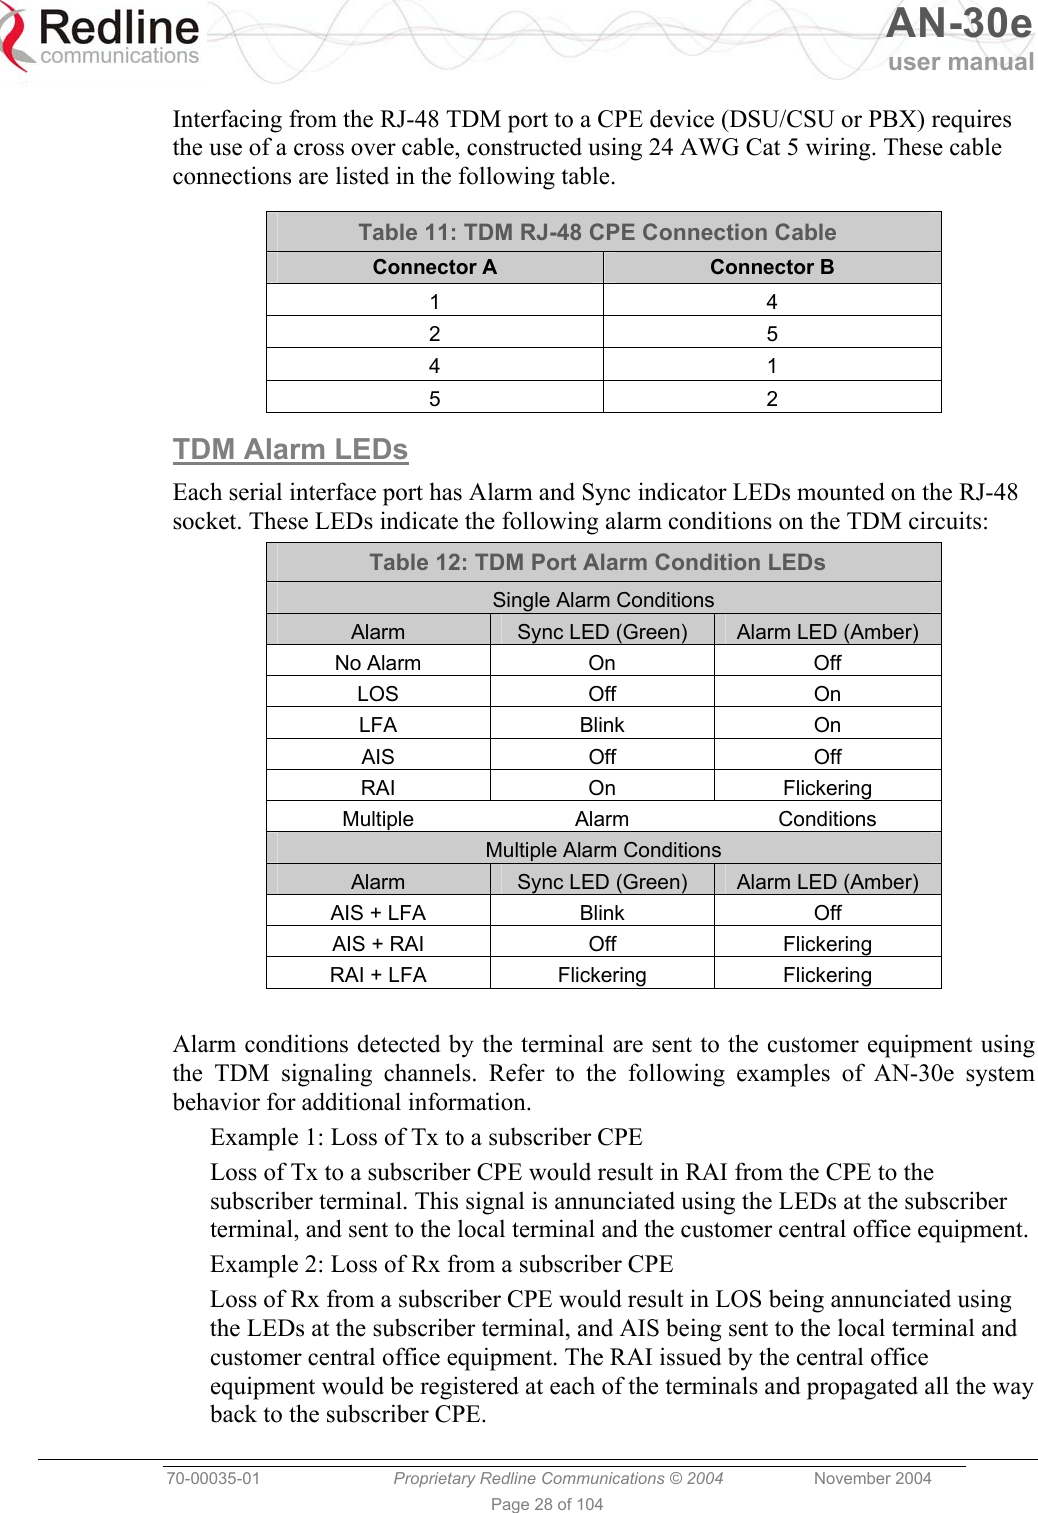   AN-30e user manual  70-00035-01  Proprietary Redline Communications © 2004 November 2004   Page 28 of 104 Interfacing from the RJ-48 TDM port to a CPE device (DSU/CSU or PBX) requires the use of a cross over cable, constructed using 24 AWG Cat 5 wiring. These cable connections are listed in the following table.  Table 11: TDM RJ-48 CPE Connection Cable Connector A  Connector B 1 4 2 5 4 1 5 2 TDM Alarm LEDs Each serial interface port has Alarm and Sync indicator LEDs mounted on the RJ-48 socket. These LEDs indicate the following alarm conditions on the TDM circuits: Table 12: TDM Port Alarm Condition LEDs Single Alarm Conditions Alarm  Sync LED (Green)  Alarm LED (Amber) No Alarm  On  Off LOS Off  On LFA Blink  On AIS Off  Off RAI On Flickering Multiple Alarm Conditions Multiple Alarm Conditions Alarm  Sync LED (Green)  Alarm LED (Amber) AIS + LFA  Blink  Off AIS + RAI  Off  Flickering RAI + LFA  Flickering  Flickering  Alarm conditions detected by the terminal are sent to the customer equipment using the TDM signaling channels. Refer to the following examples of AN-30e system behavior for additional information. Example 1: Loss of Tx to a subscriber CPE Loss of Tx to a subscriber CPE would result in RAI from the CPE to the subscriber terminal. This signal is annunciated using the LEDs at the subscriber terminal, and sent to the local terminal and the customer central office equipment. Example 2: Loss of Rx from a subscriber CPE Loss of Rx from a subscriber CPE would result in LOS being annunciated using the LEDs at the subscriber terminal, and AIS being sent to the local terminal and customer central office equipment. The RAI issued by the central office equipment would be registered at each of the terminals and propagated all the way back to the subscriber CPE. 